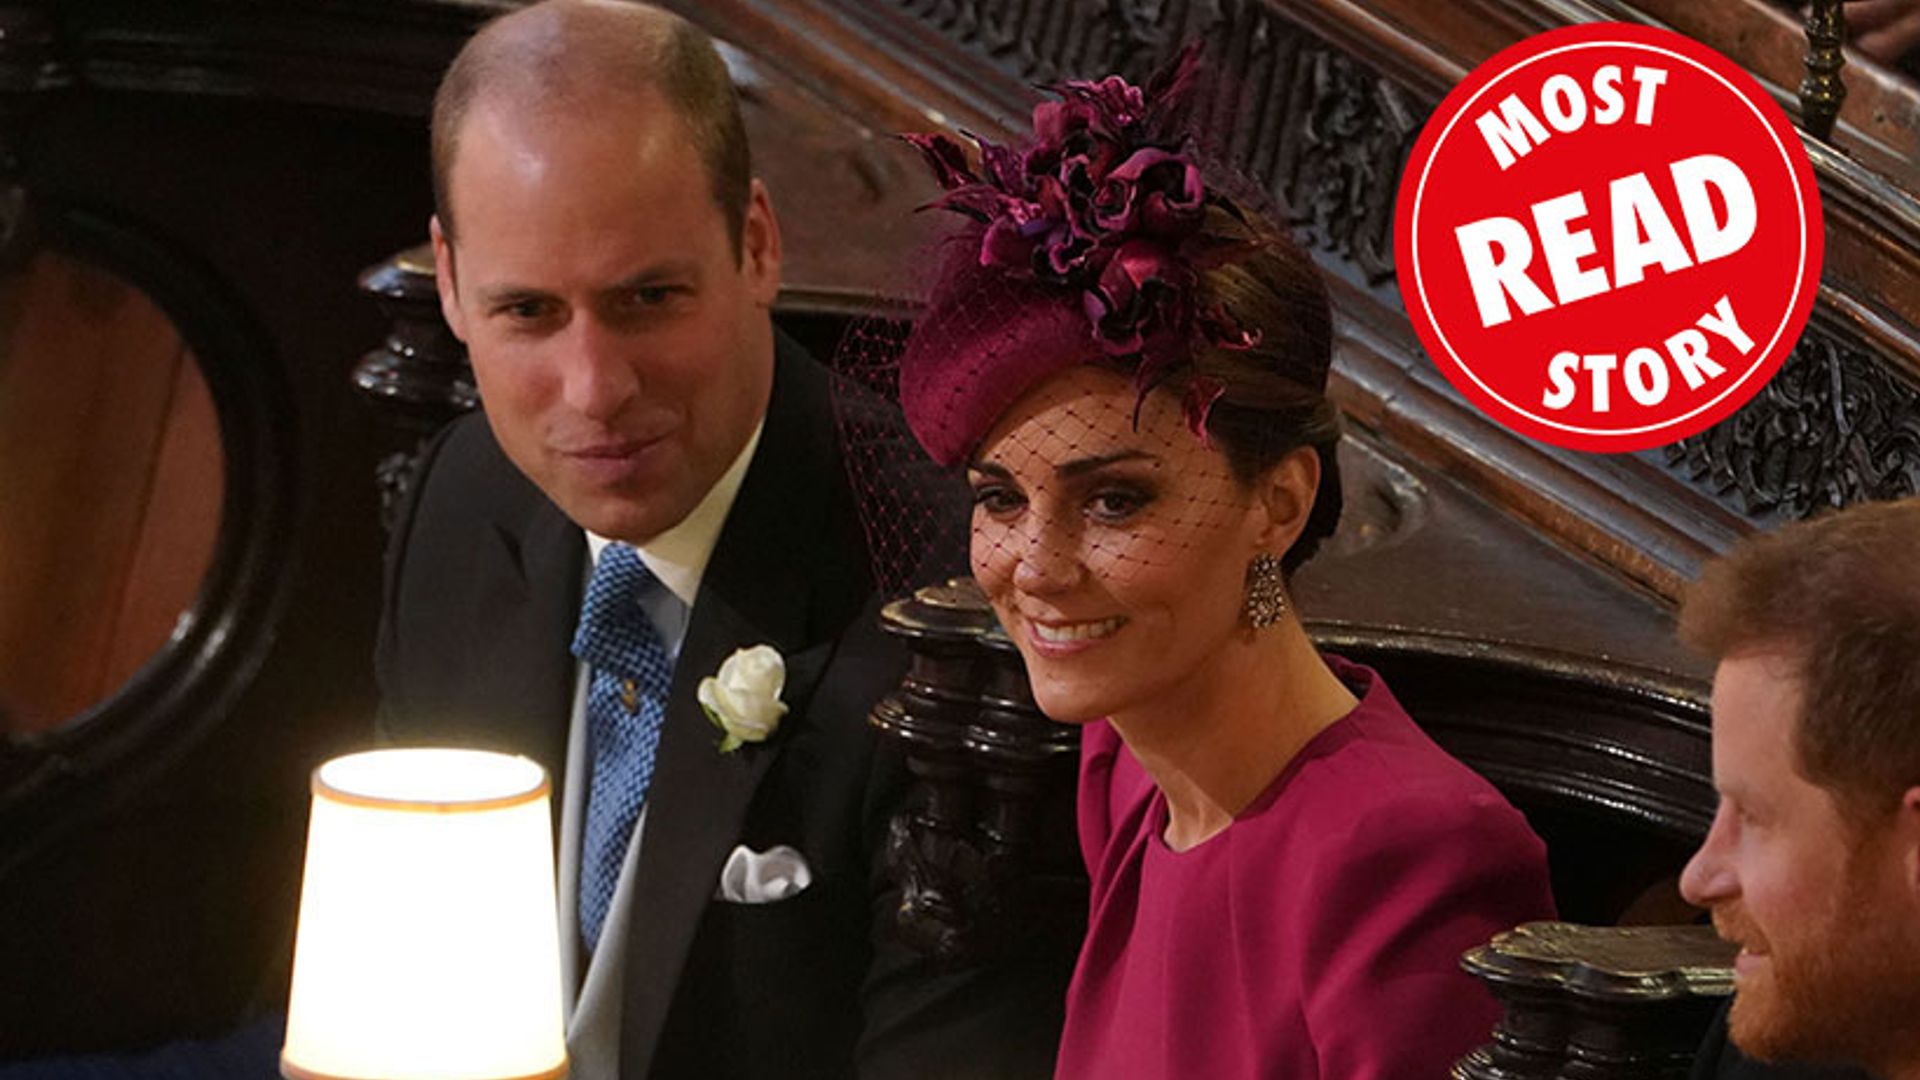 kate-and-william-most-read